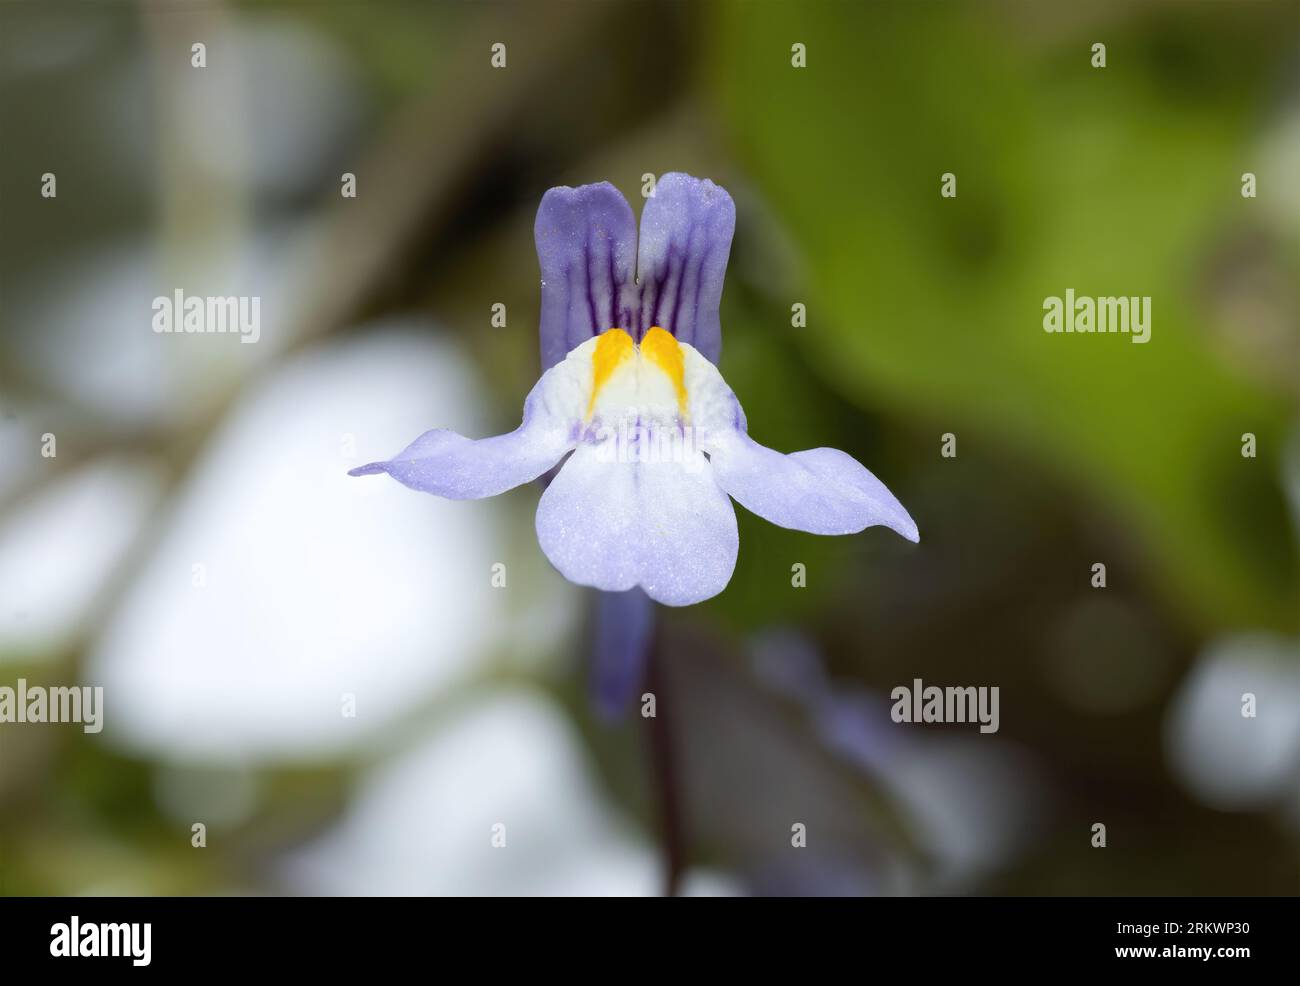 Macro photo of the flower Cymbalaria muralis, small purple wildflowers, Ivy-leaved toadflax or Kenilworth Ivy isolated on blurry background Stock Photo